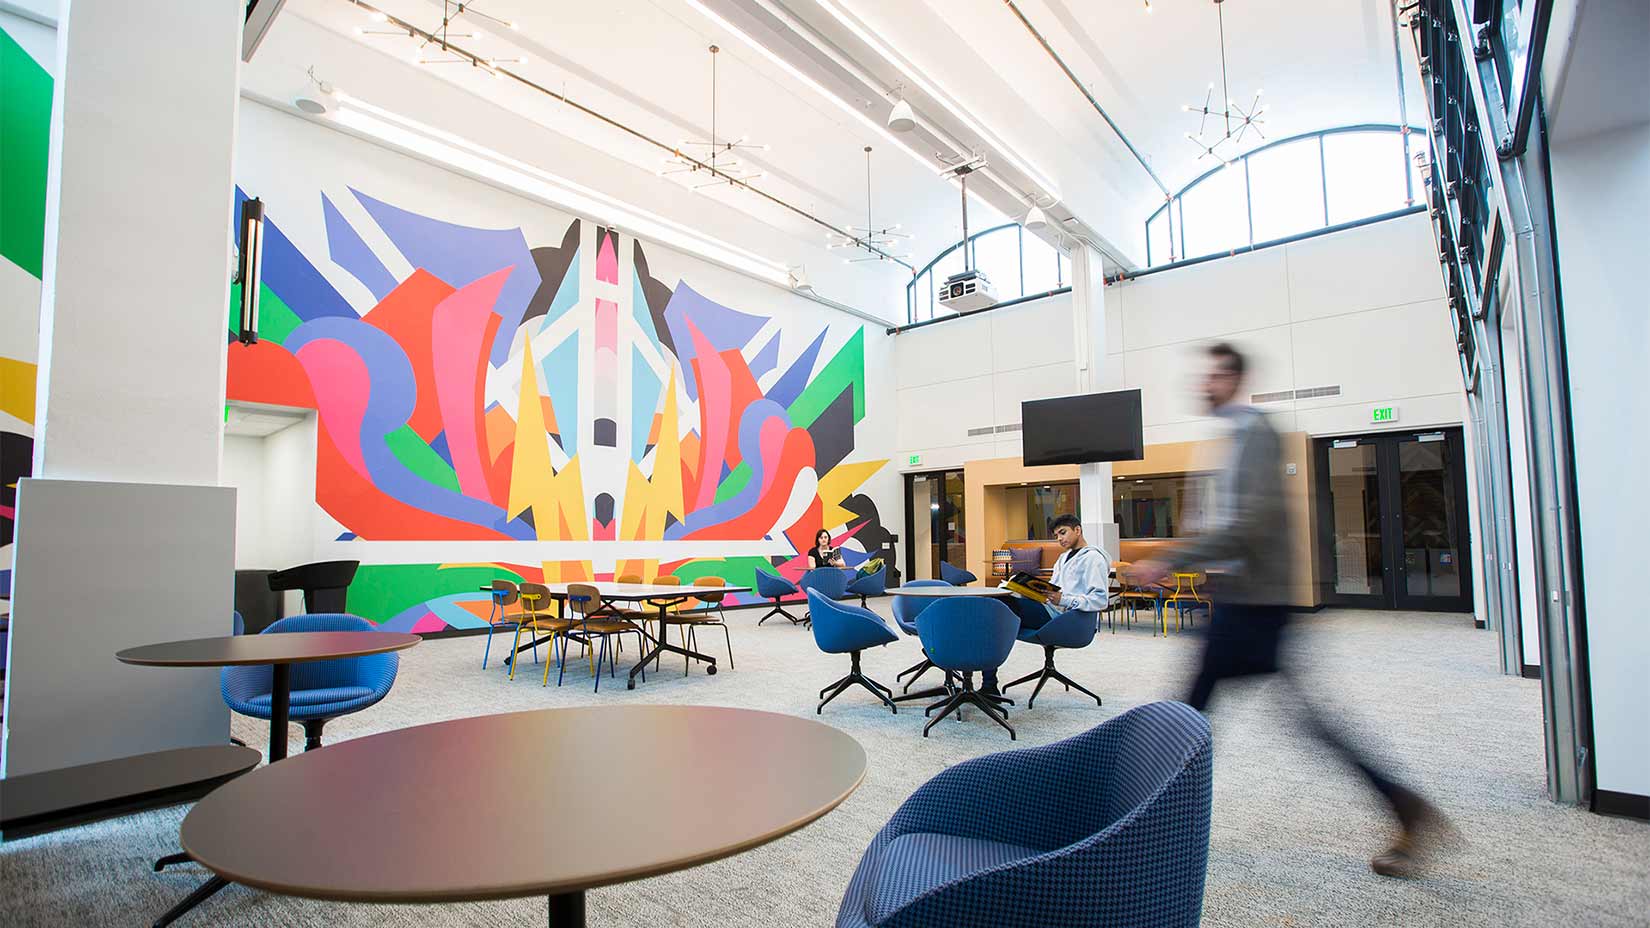 Students, faculty, and staff relax in the Mural Room of the Oxford Student Center.